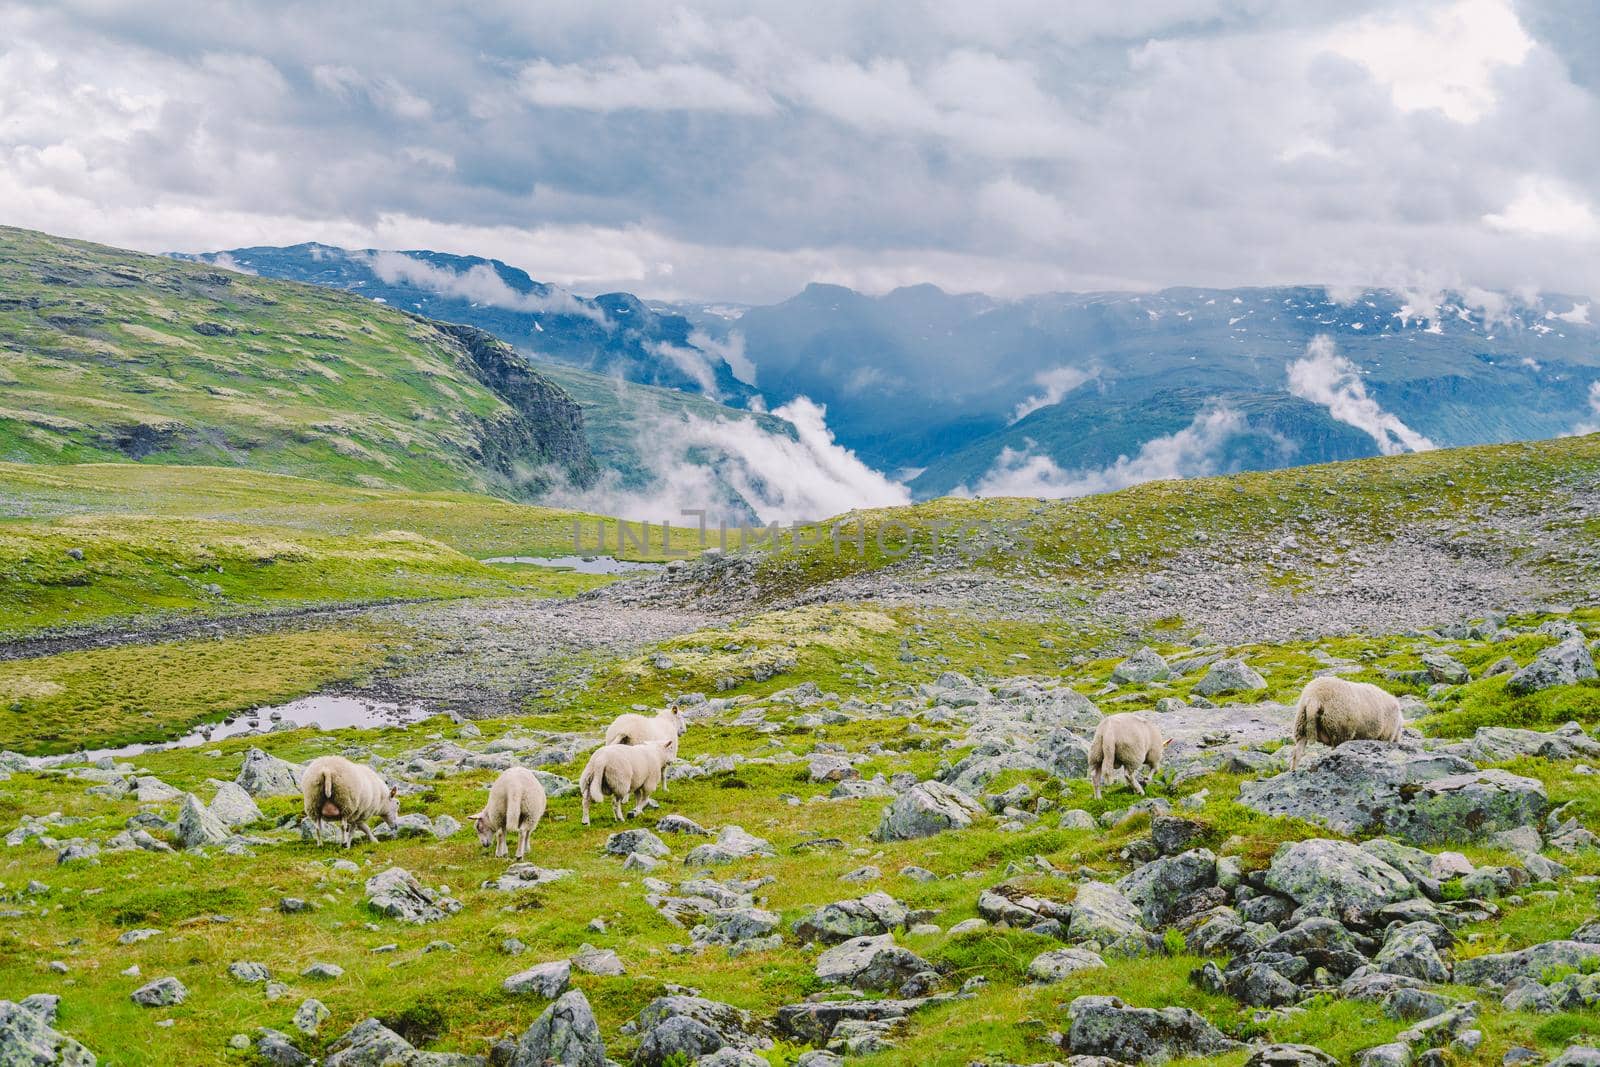 Sheep walking along road. Norway landscape. A lot of sheep on the road in Norway. Rree range sheep on a mountain road in Scandinavia. Sheep Farming. Mountain road with sheeps by Tomashevska